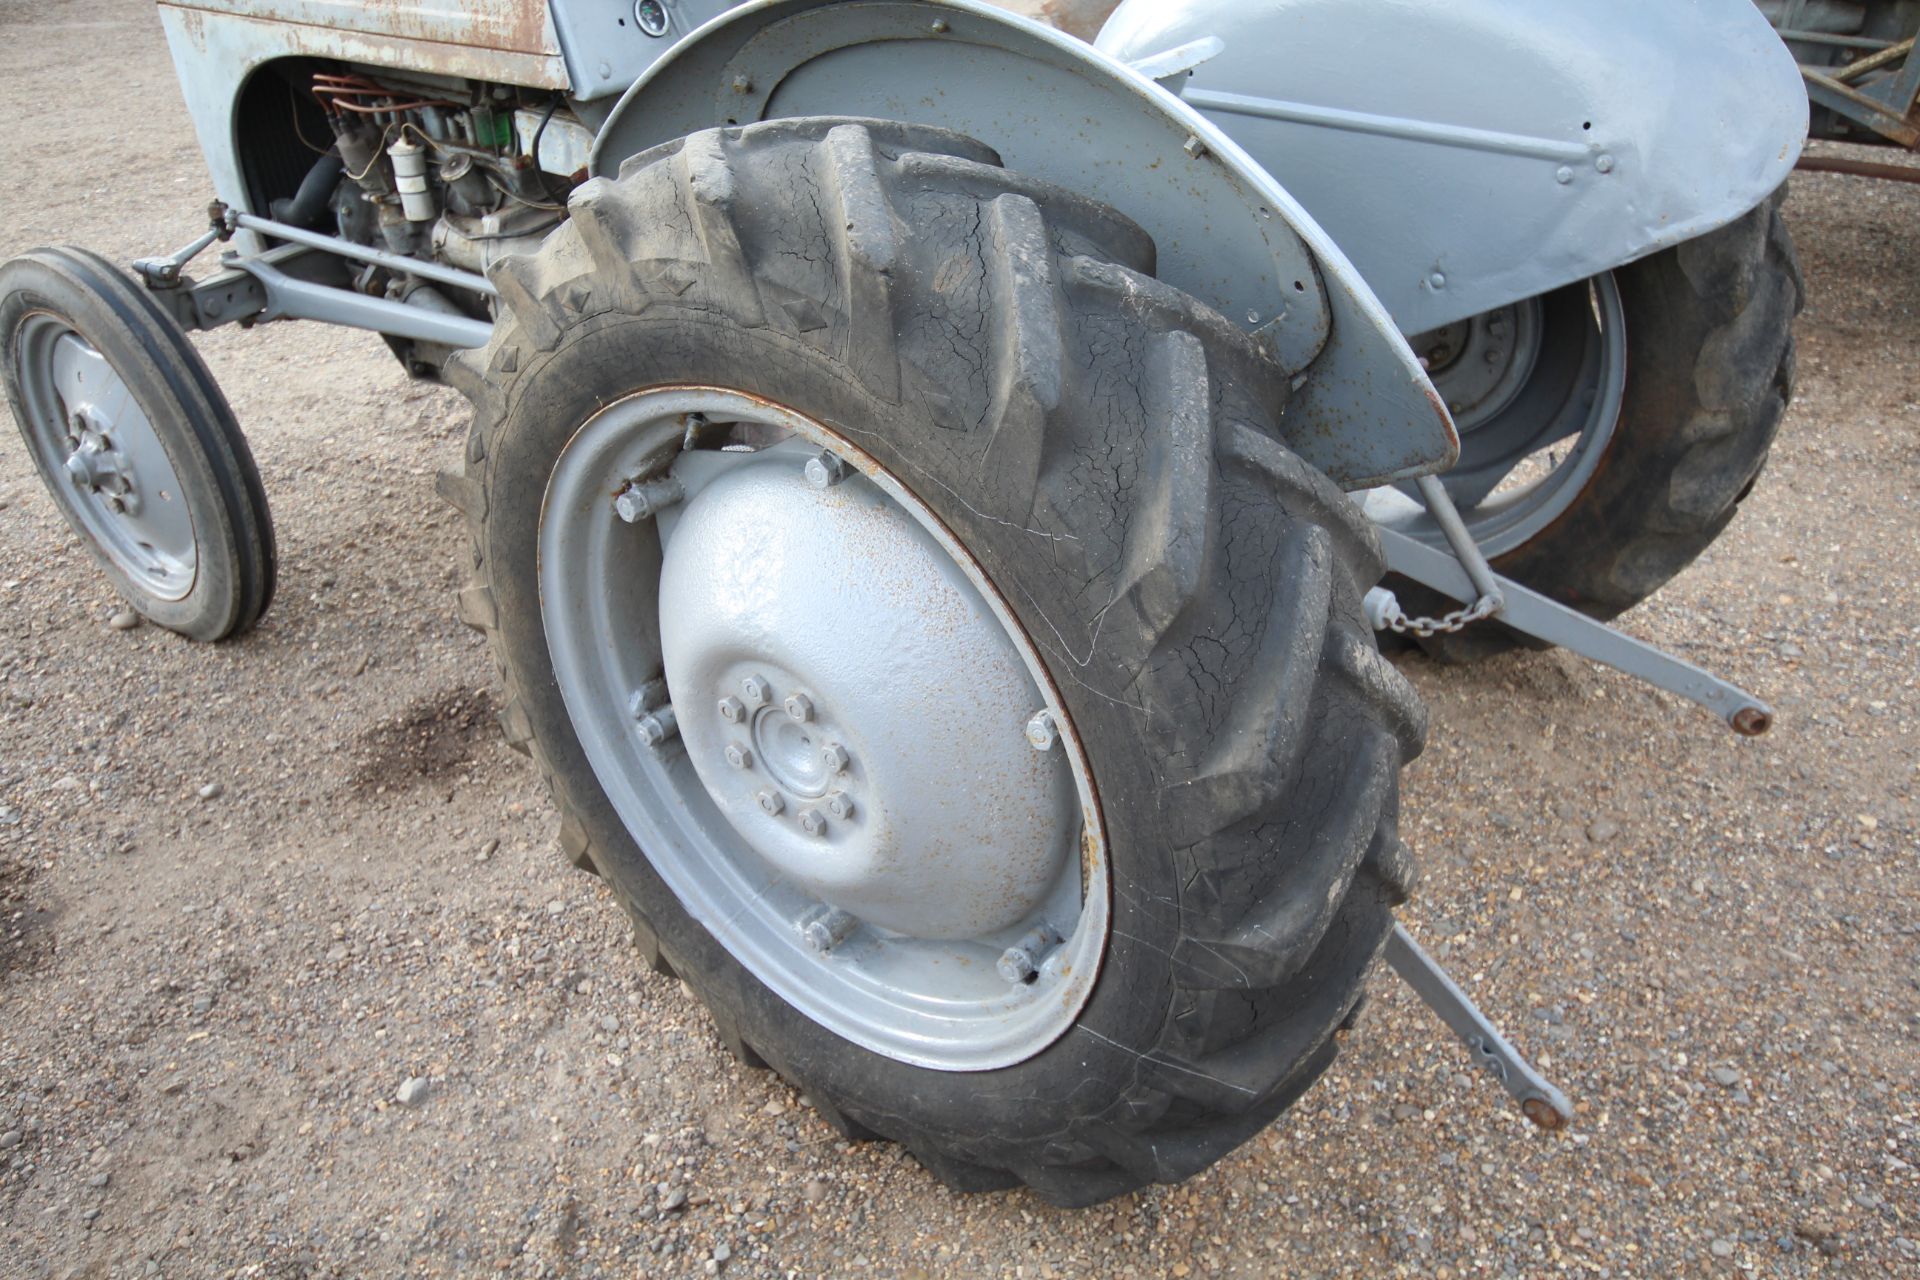 Ferguson TED 20 petrol/ TVO 2WD tractor. Has not been running recently. Key held. - Image 33 of 63